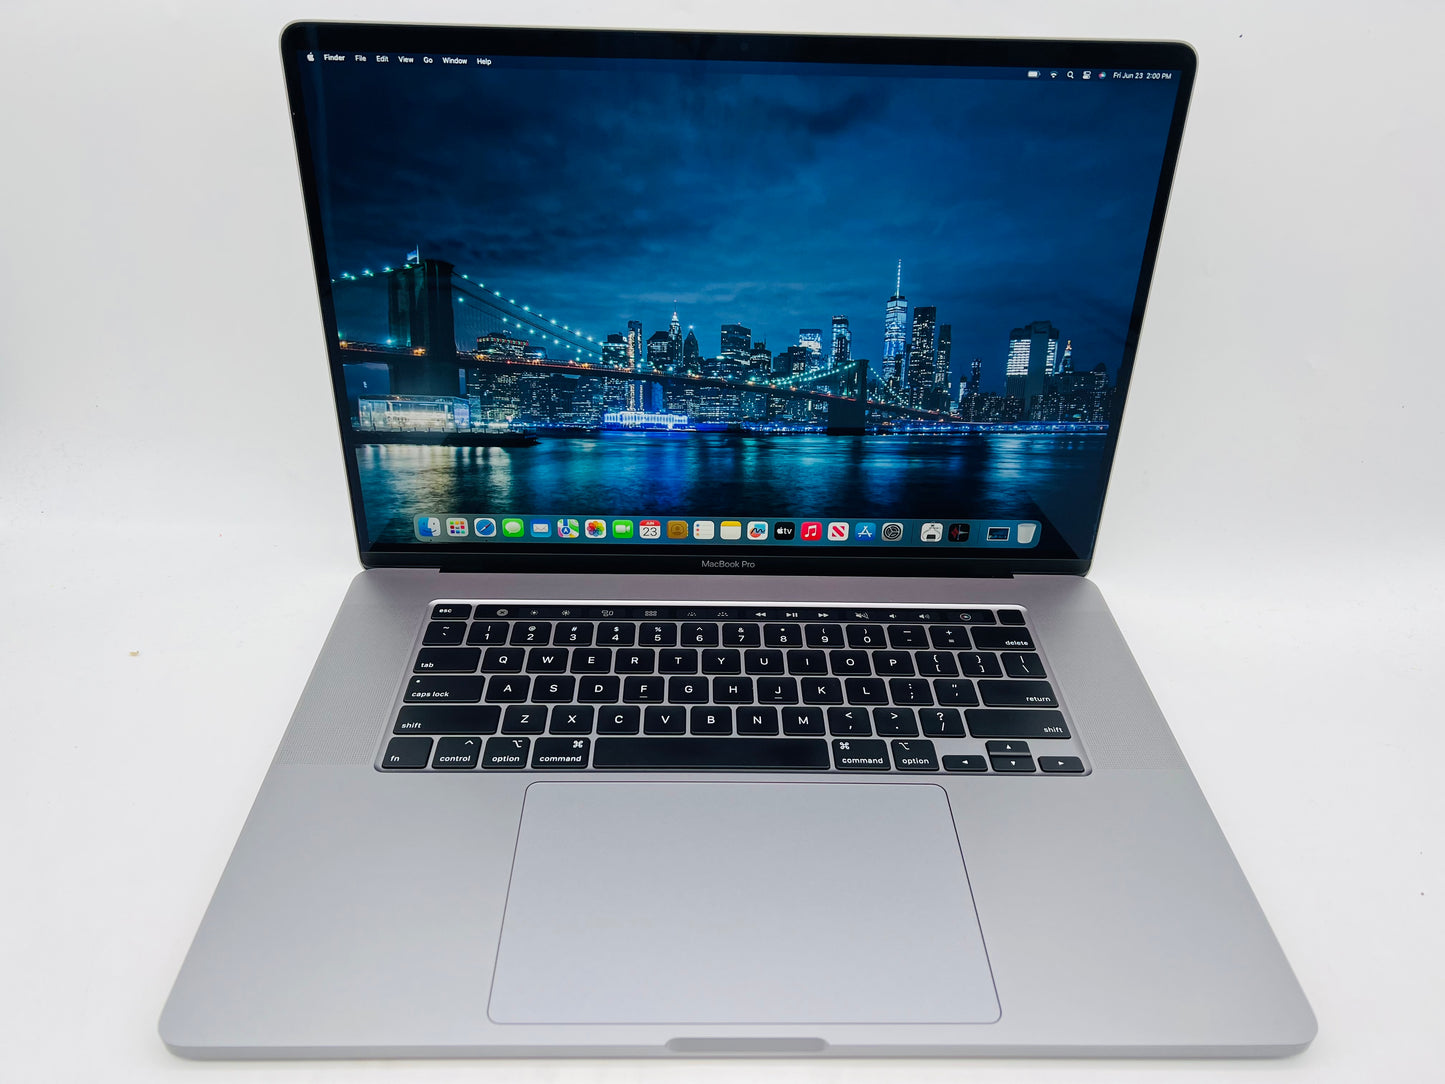 Apple 2019 MacBook Pro 16in 2.6GHz i7 16GB RAM 512GB SSD RP5300M 4GB - Excellent